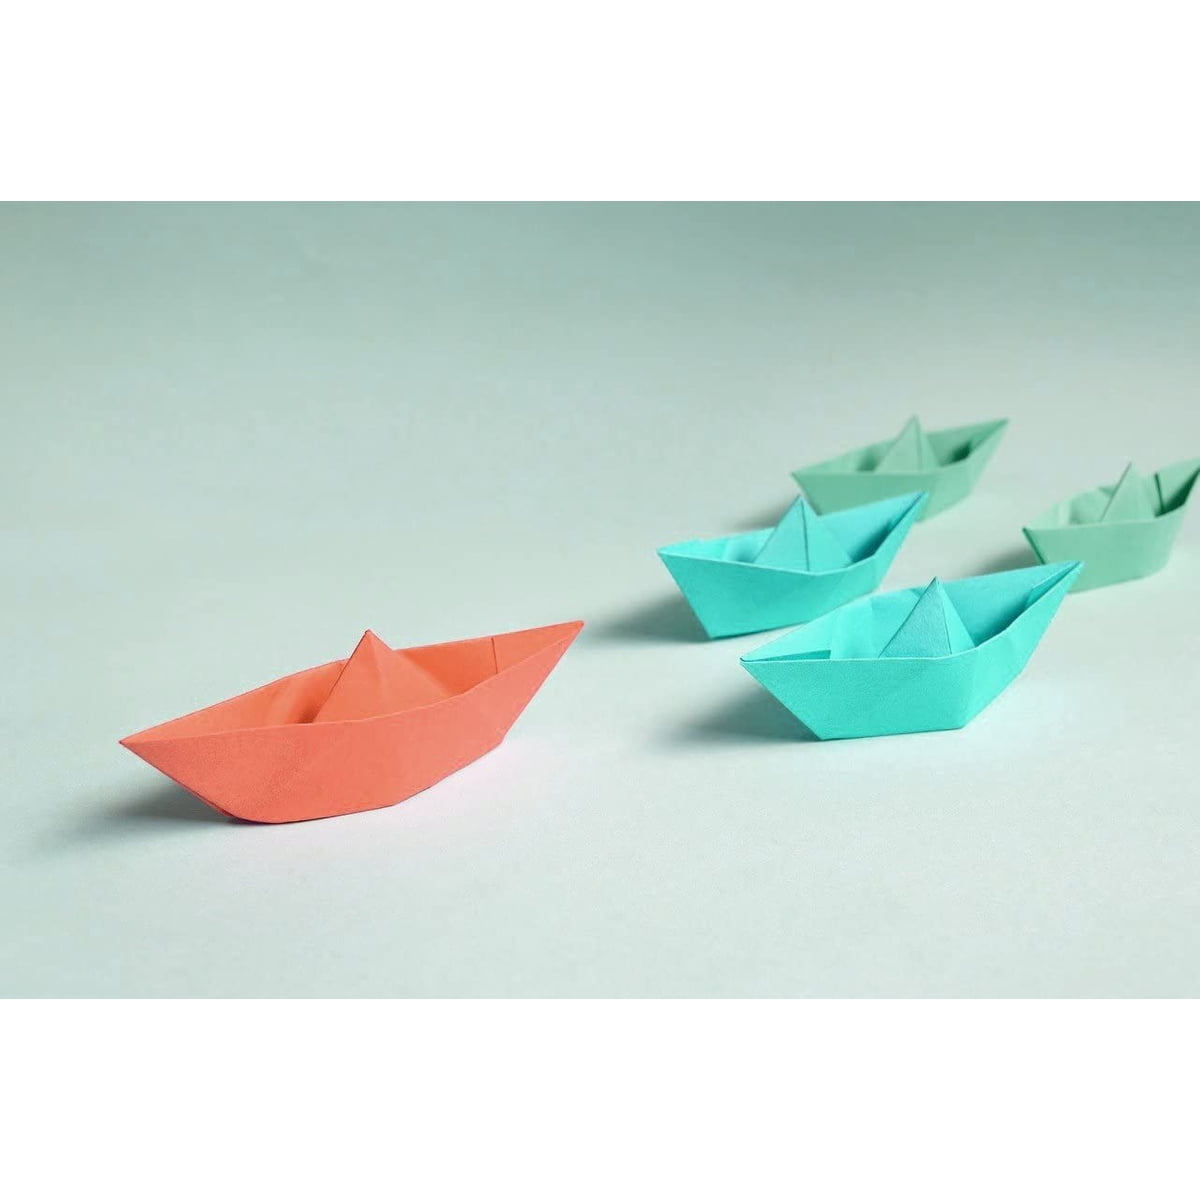 500 Square Double Sided Origami Folding Lucky Wish Paper Crane Craft Color Sheet